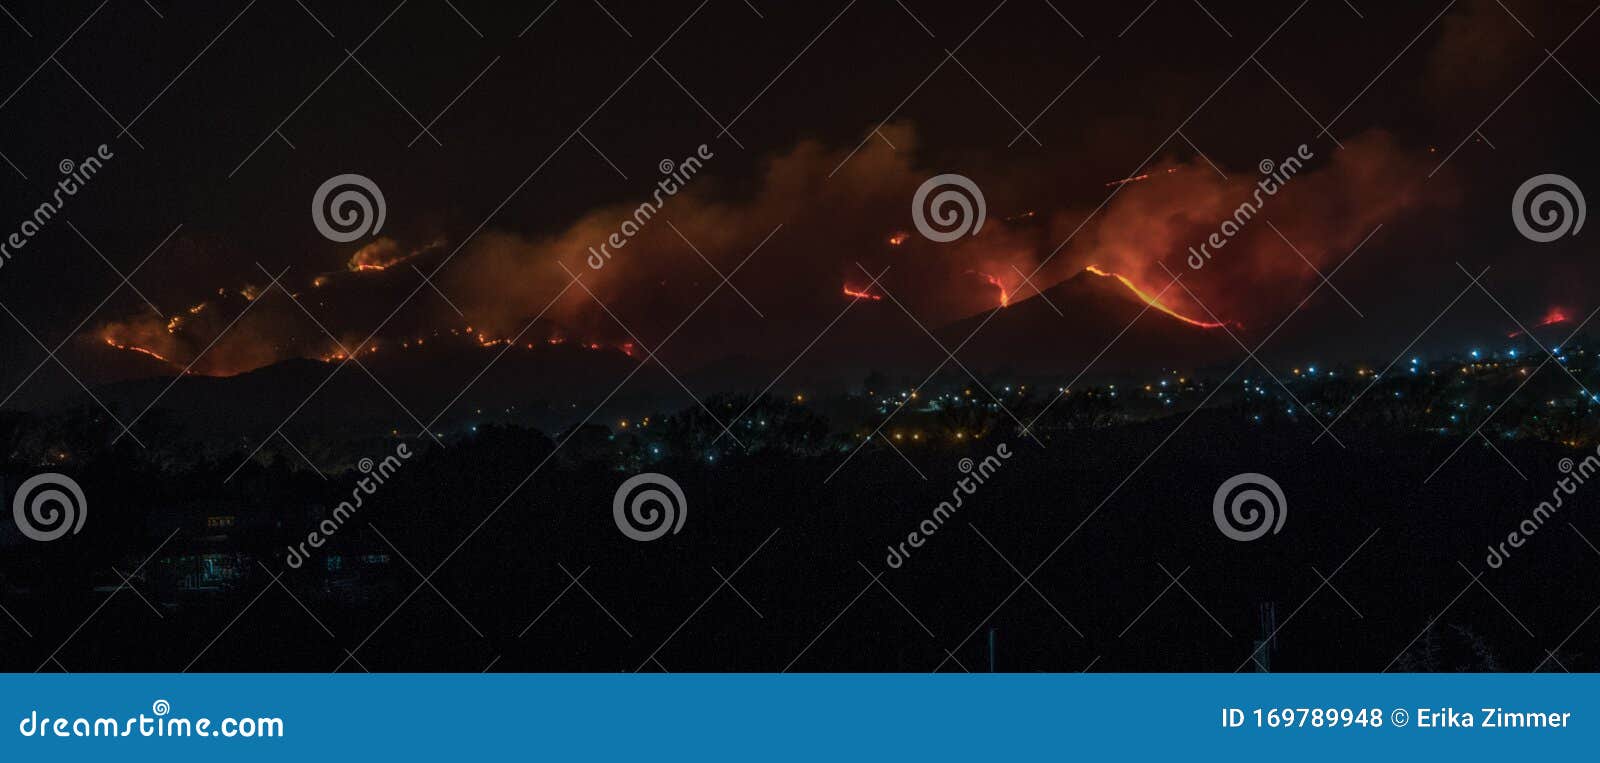 night view of a fire in the mountains